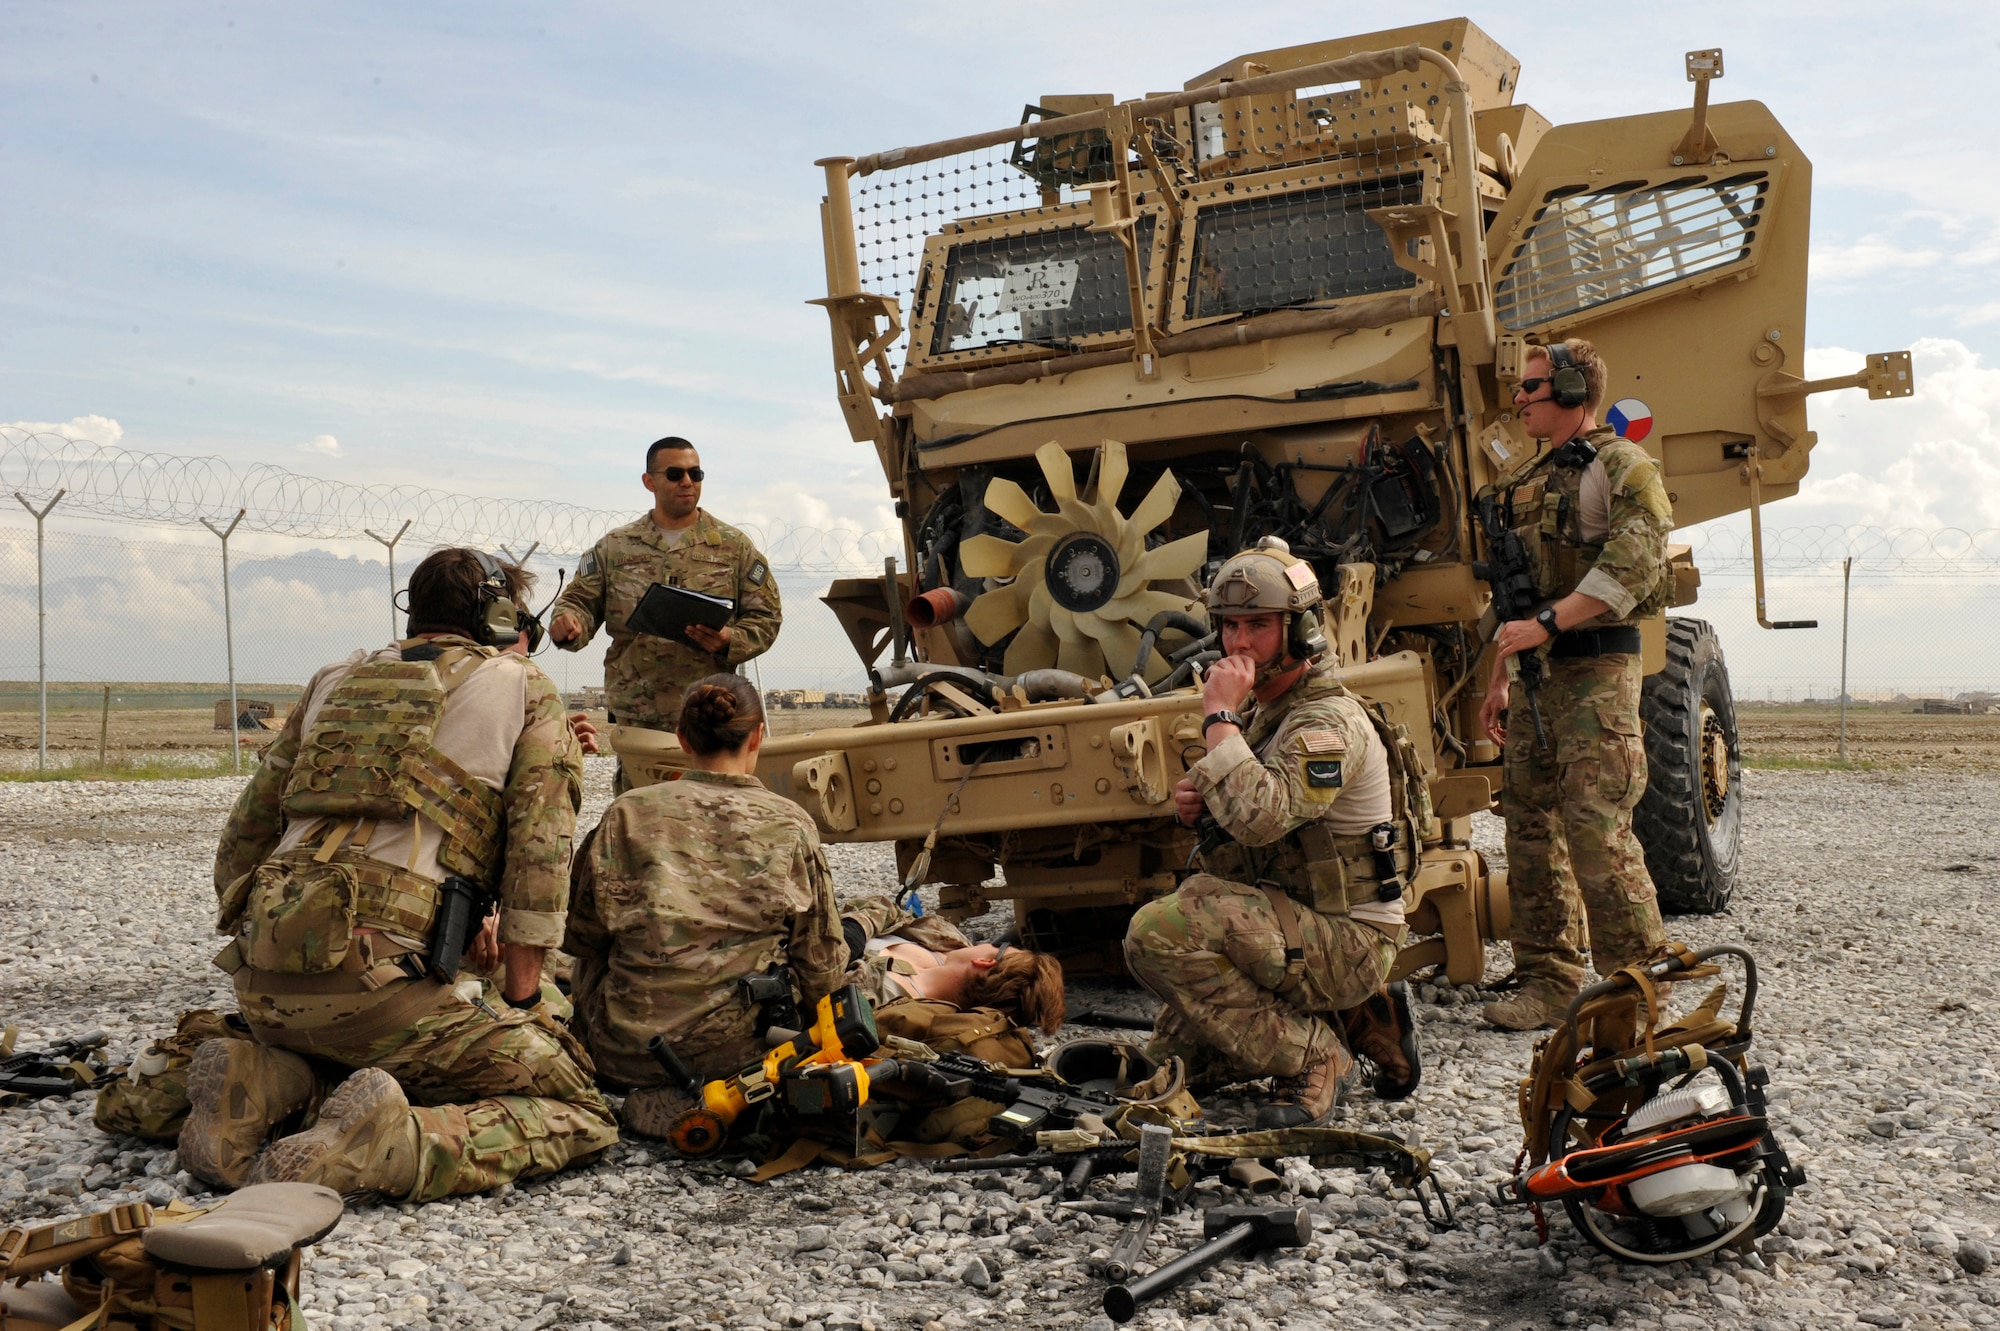 A flight surgeon and pararescuemen from the 83rd ERQS, 455 Air Expeditionary Wing, Bagram Airfield, Afghanistan, treat patients during a training exercise here May 5, 2014. The scenario simulated a vehicle striking an Improvised Explosive Device. During the training, rescue crews flew on HH-60G Pave Hawks to the simulated point of injury, provided security, treated patients, prepared them for travel, and safely departed the area. The rescue team is deployed from Moody Air Force Base, Ga. and Davis-Monthan Air Force Base, Ariz. (U.S. Air Force photo by Maj. Brandon Lingle/Released)